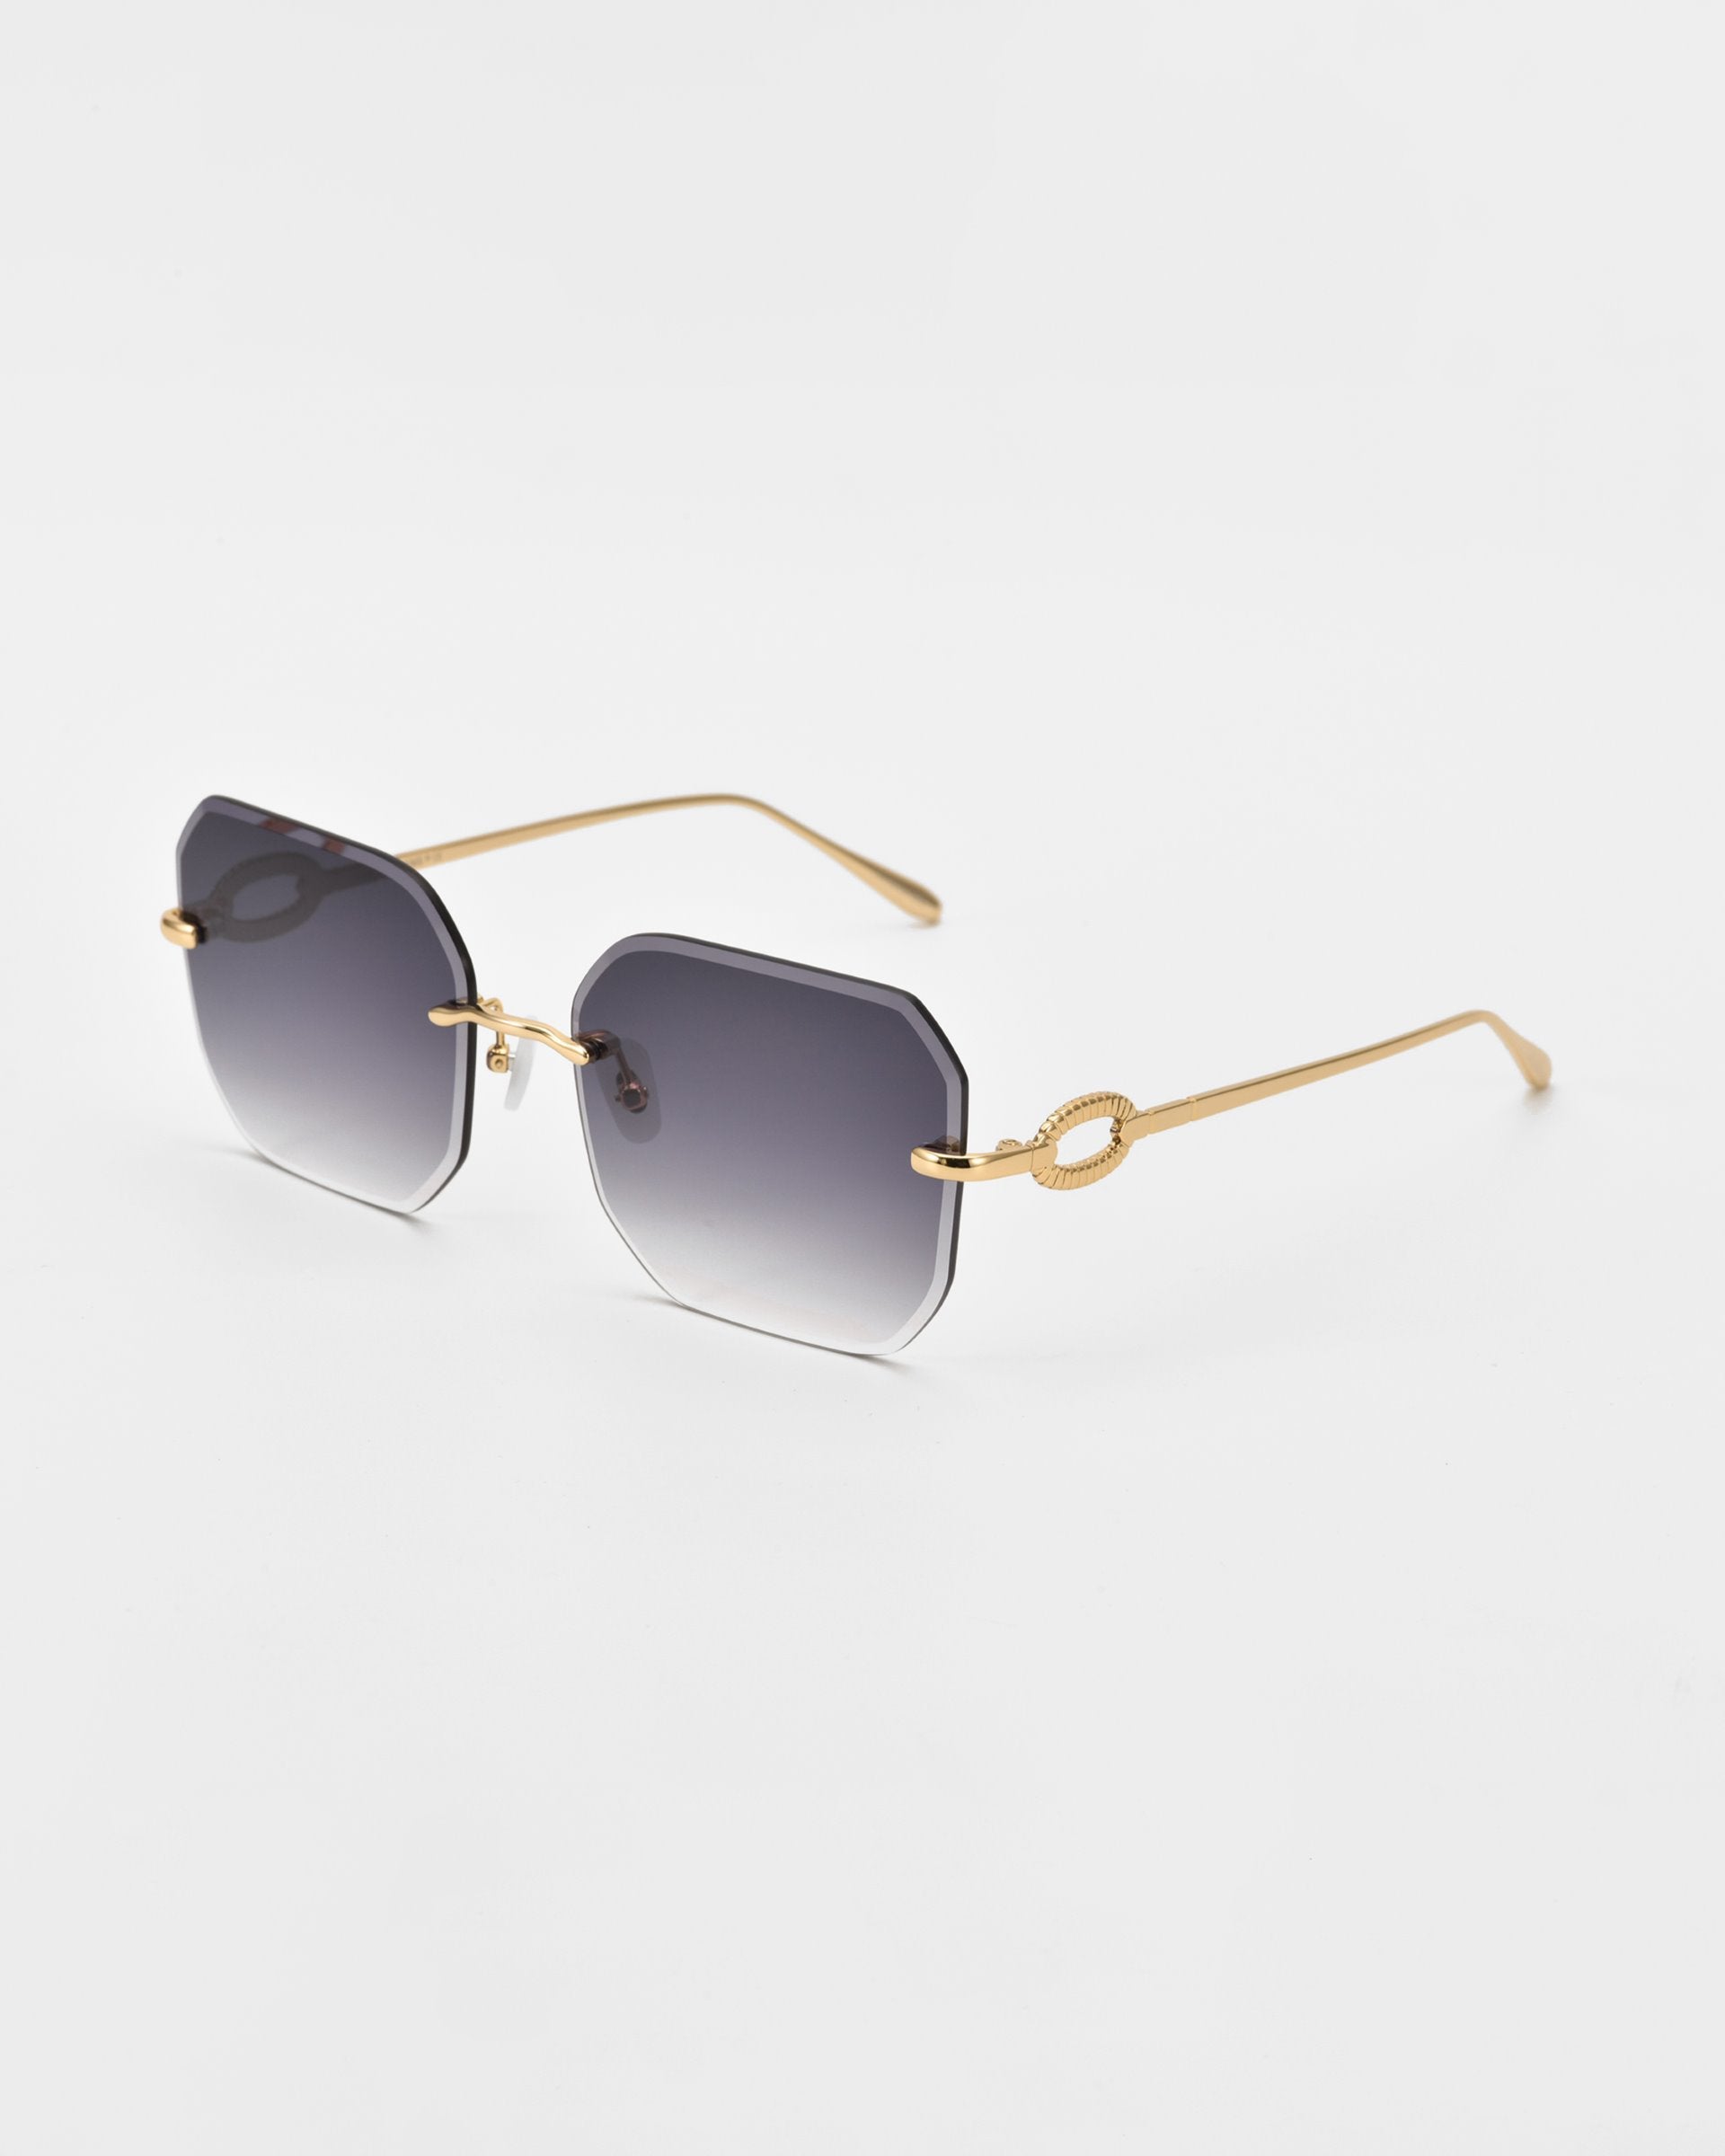 The Aria sunglasses by For Art&#39;s Sake® showcase stylish square, diamond-cut lenses with a gradient gray tint and thin gold arms. The arms feature a decorative loop detail near the hinges. Enhanced with jade-stone nose pads, these glasses are set against a plain white background.